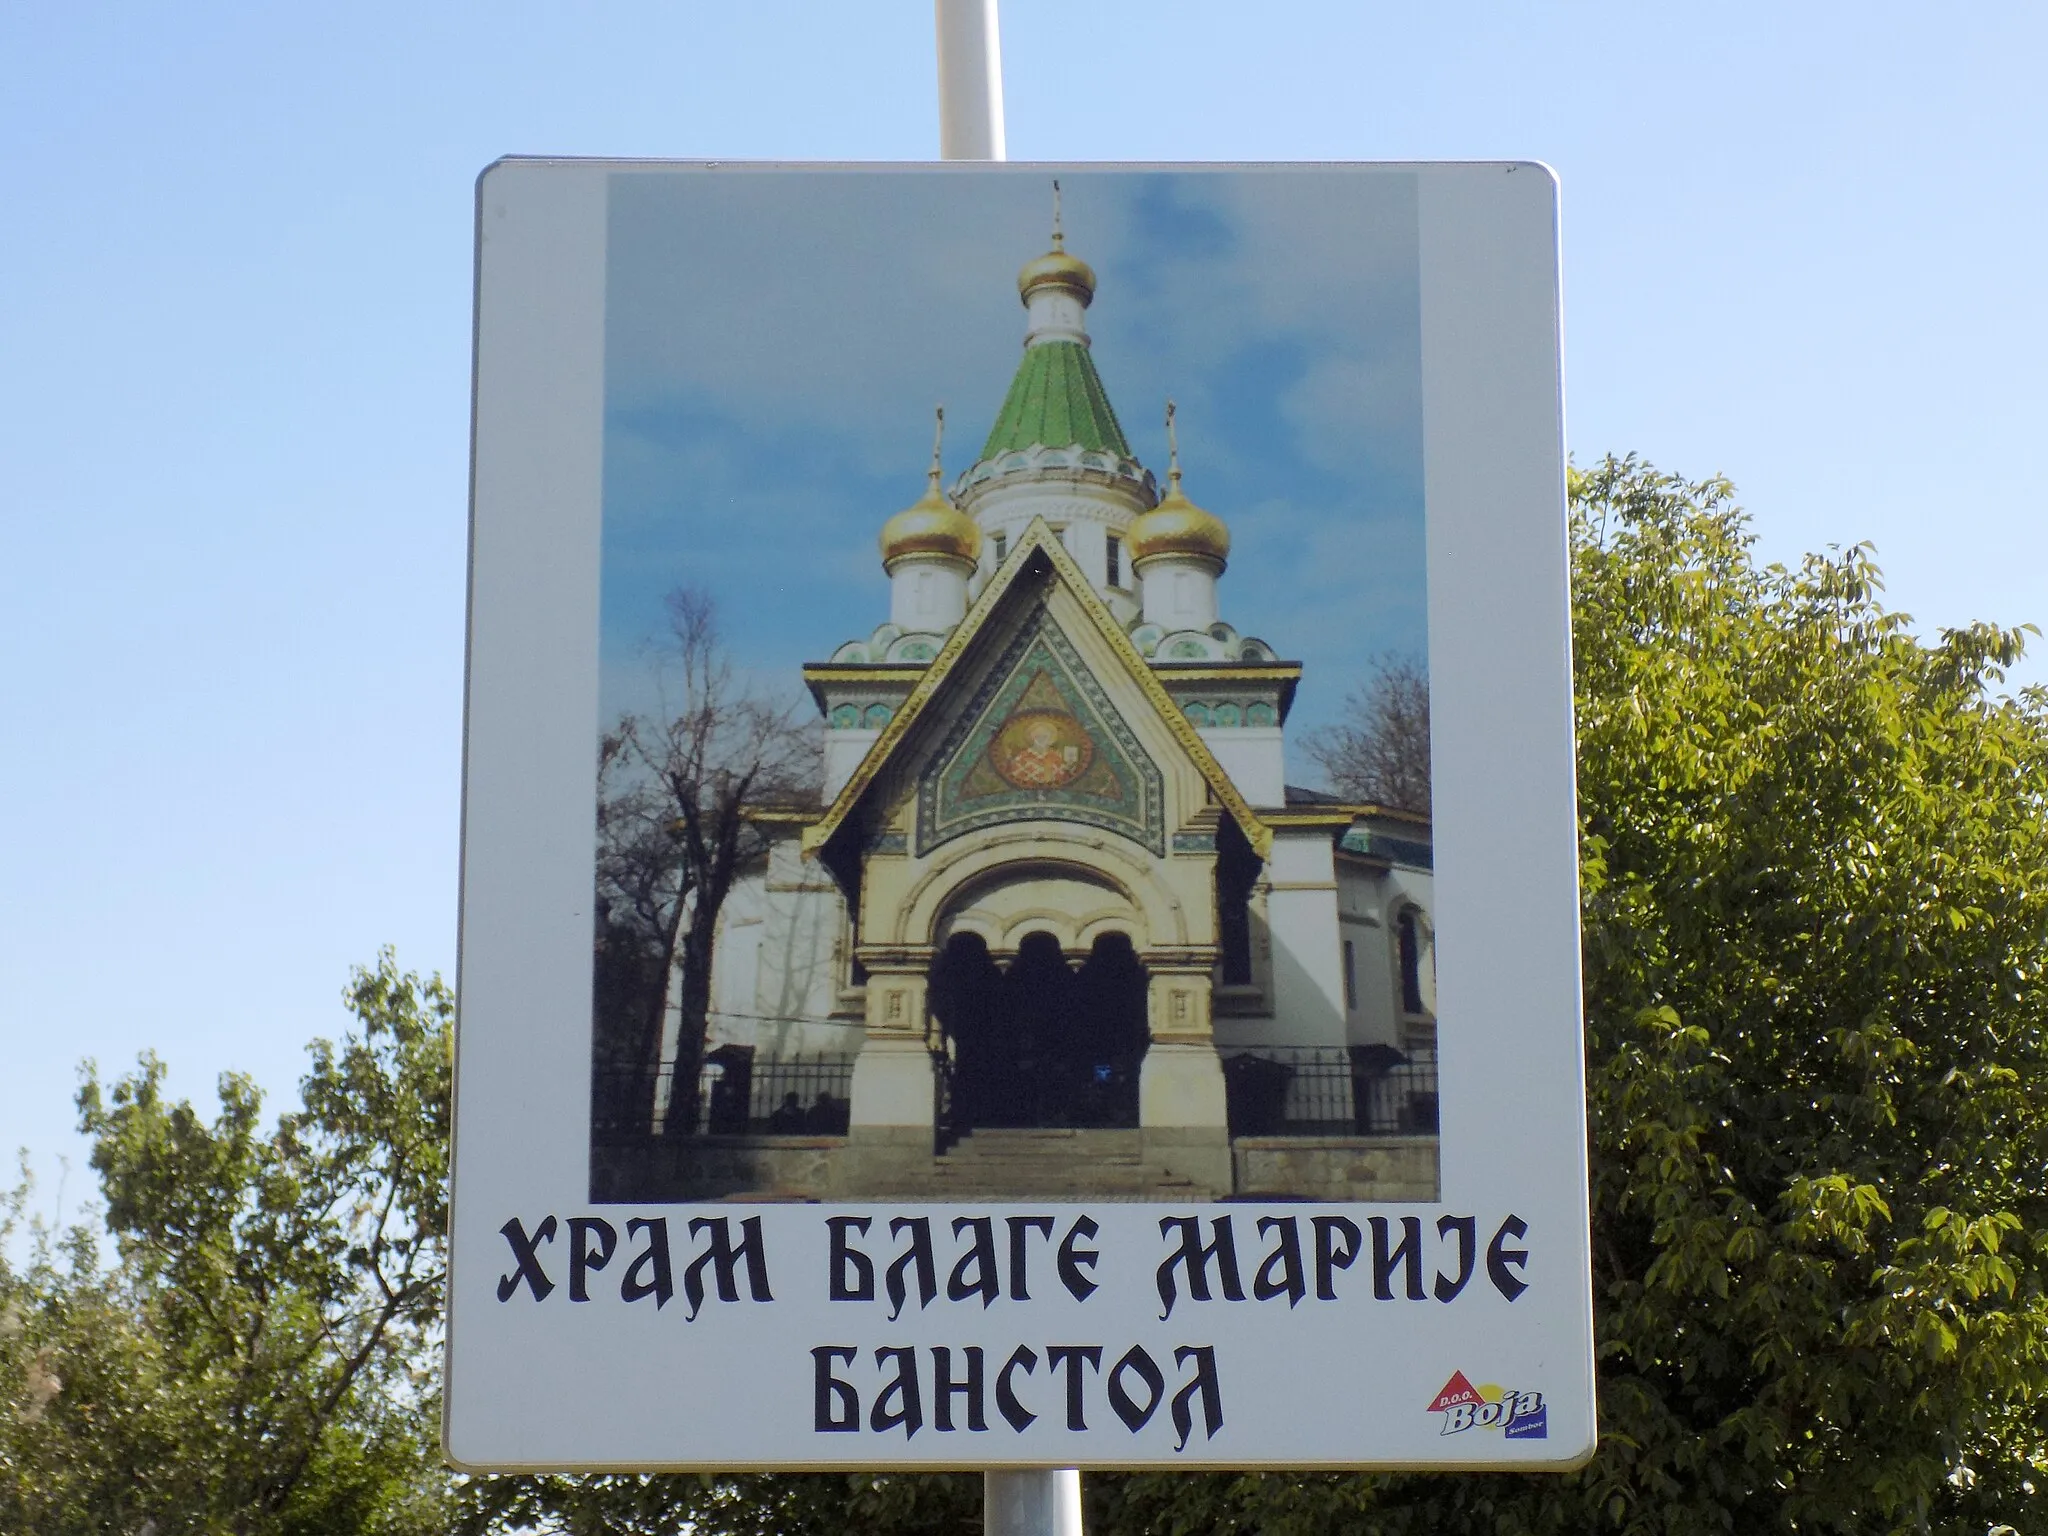 Photo showing: Church of the Blessed Virgin Mary in Banstol (Sremski Karlovci, Serbia) - info board